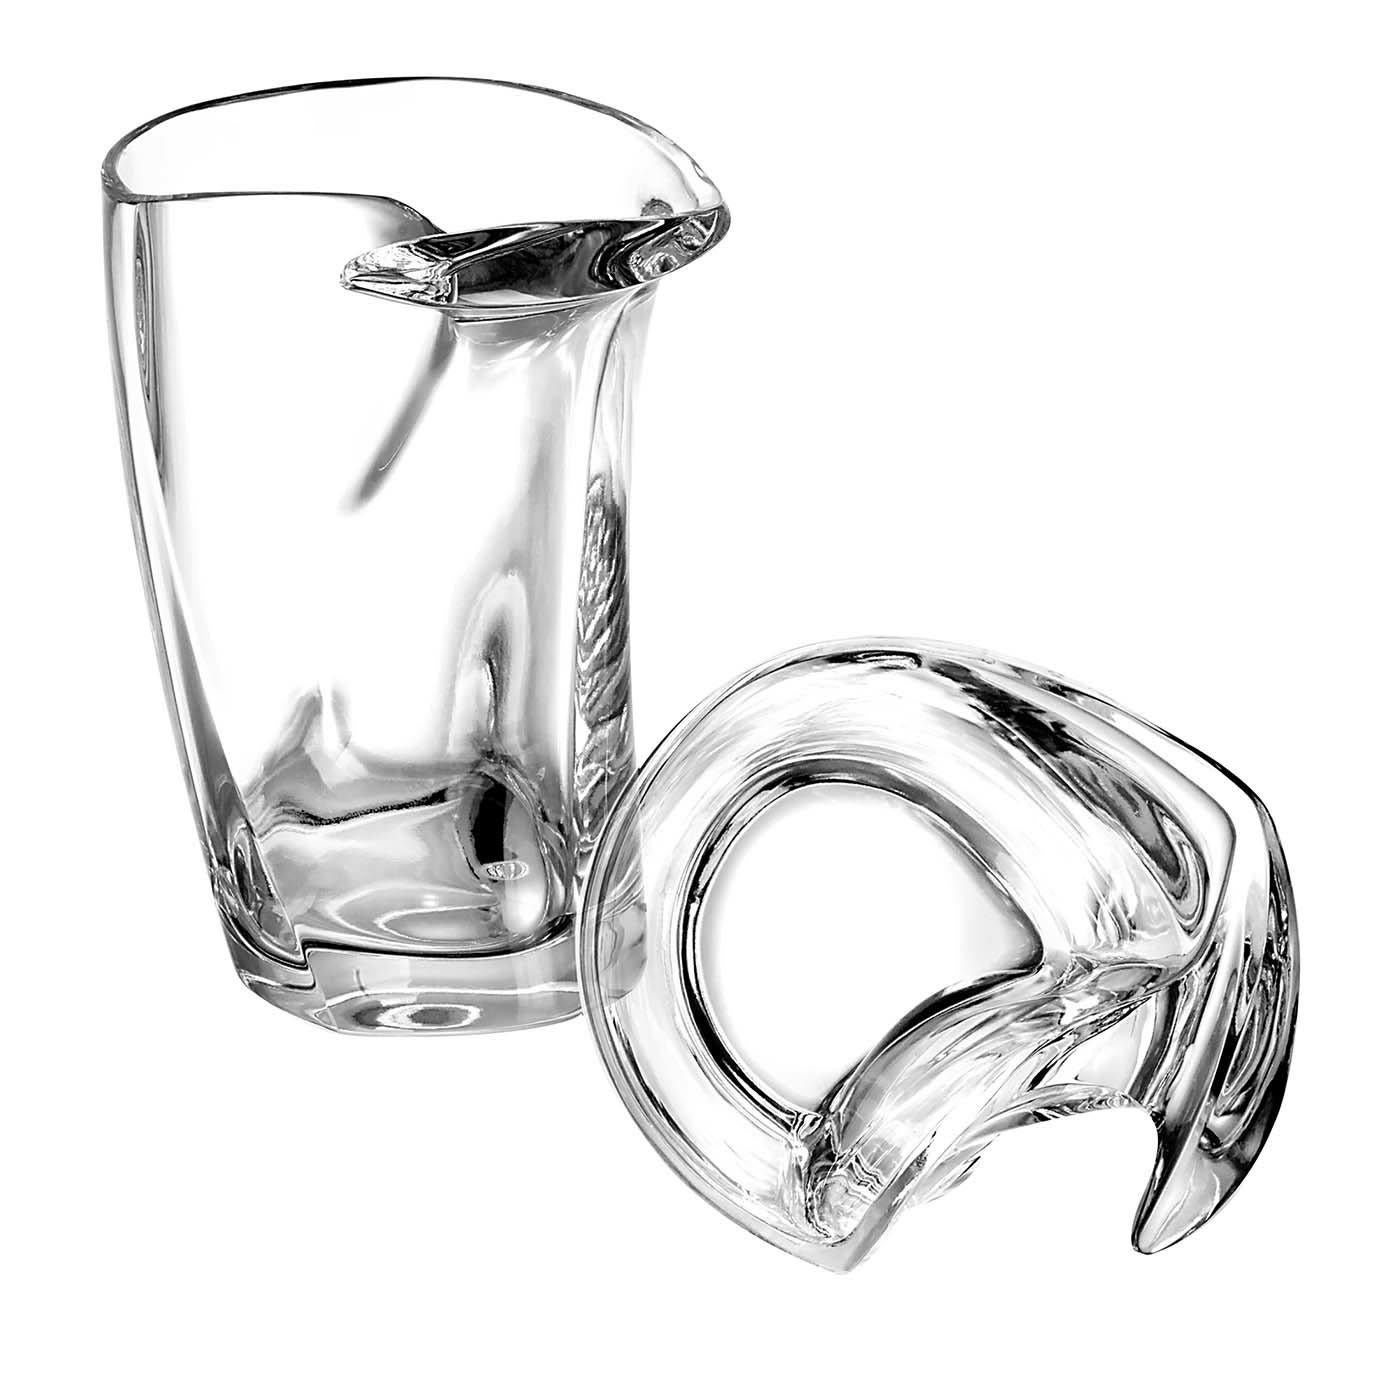 This beer mug is a one-of-a-kind objet d'art by Marcello Mantengoli. A collector's piece that will infuse any dining set with refined sophistication, it is handcrafted of clear glass. Ergonomic and practical, it showcases a unique handle of strong